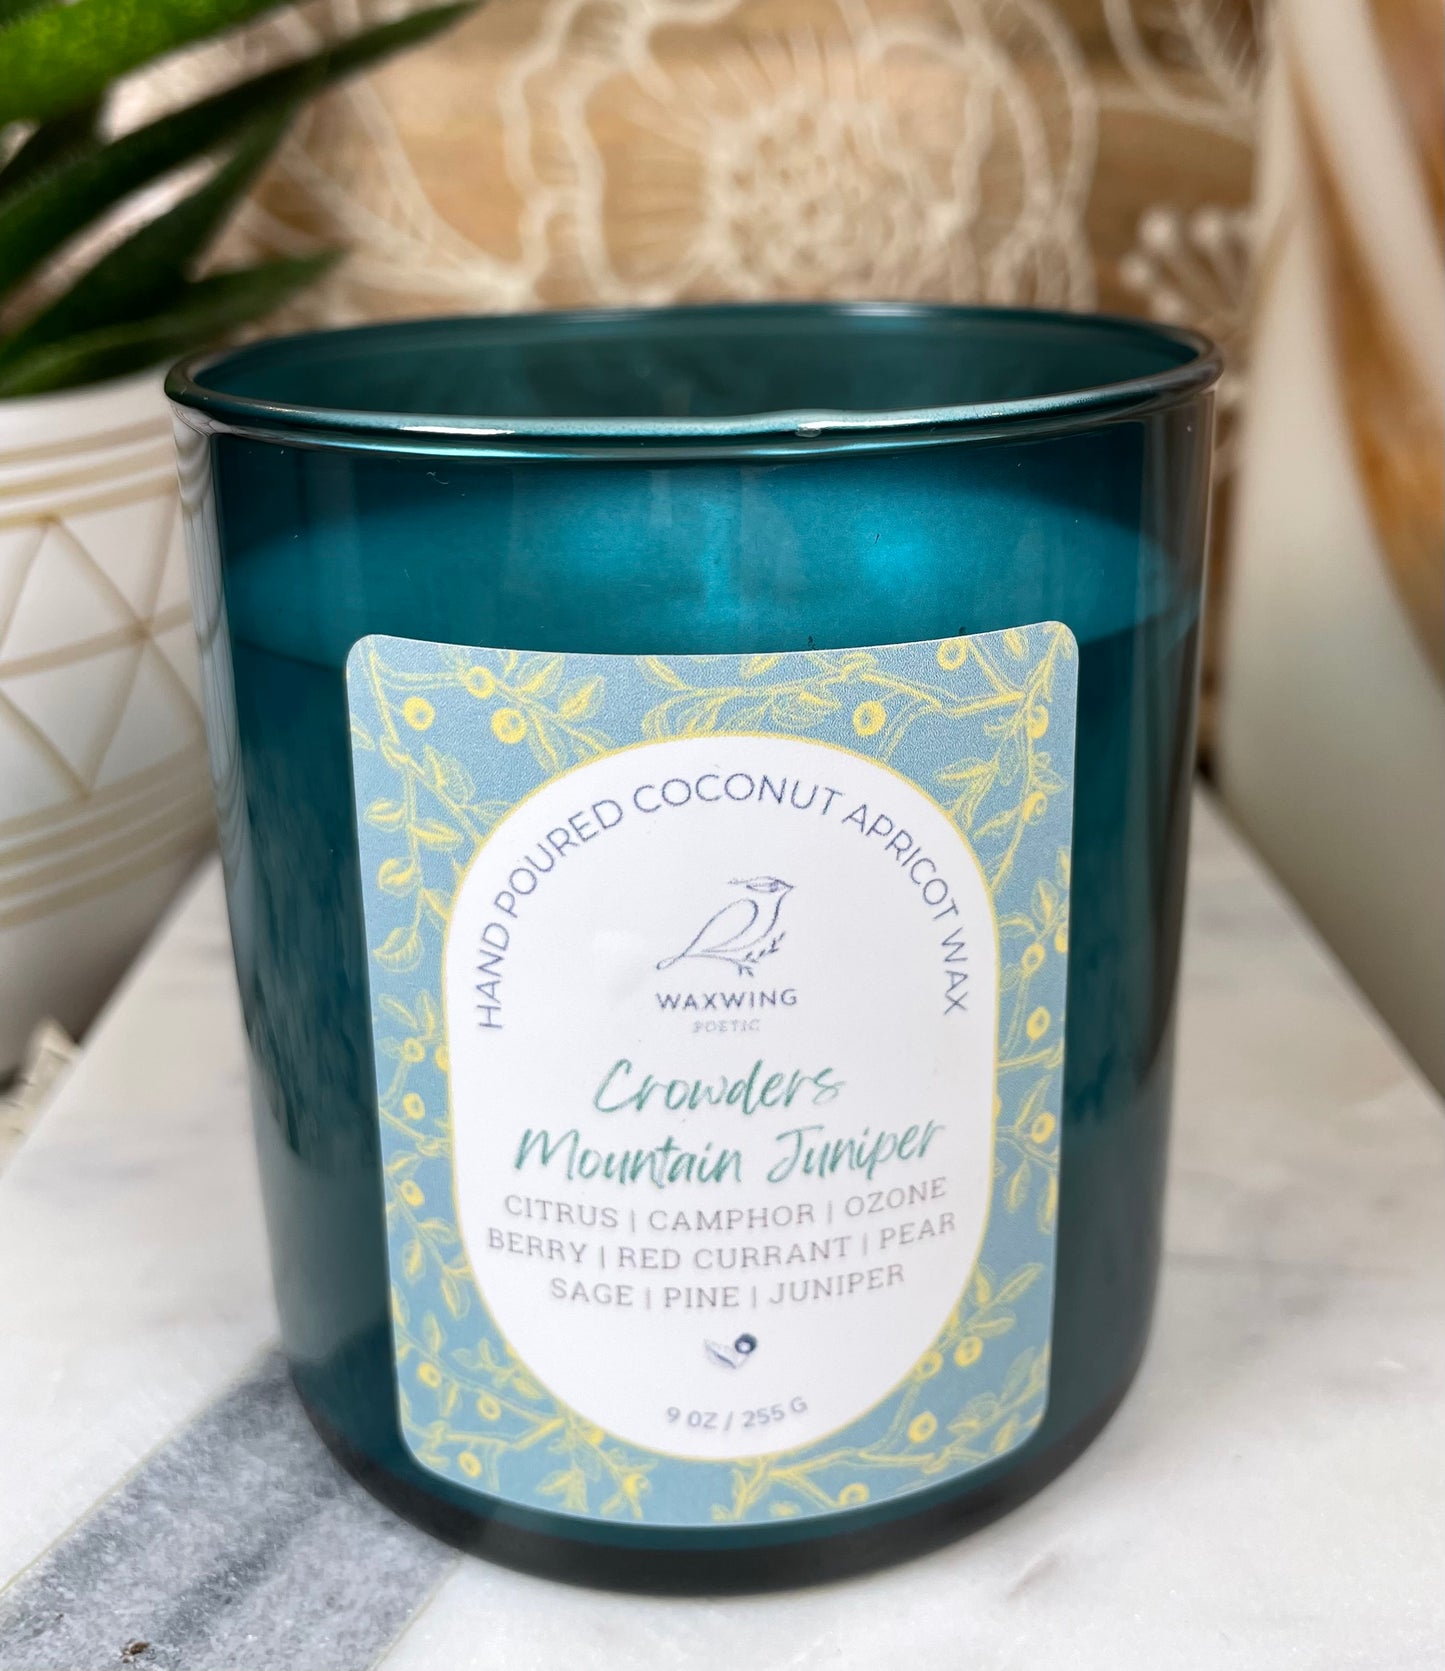 Crowders Mountain Juniper | Coconut Apricot Wax Candle